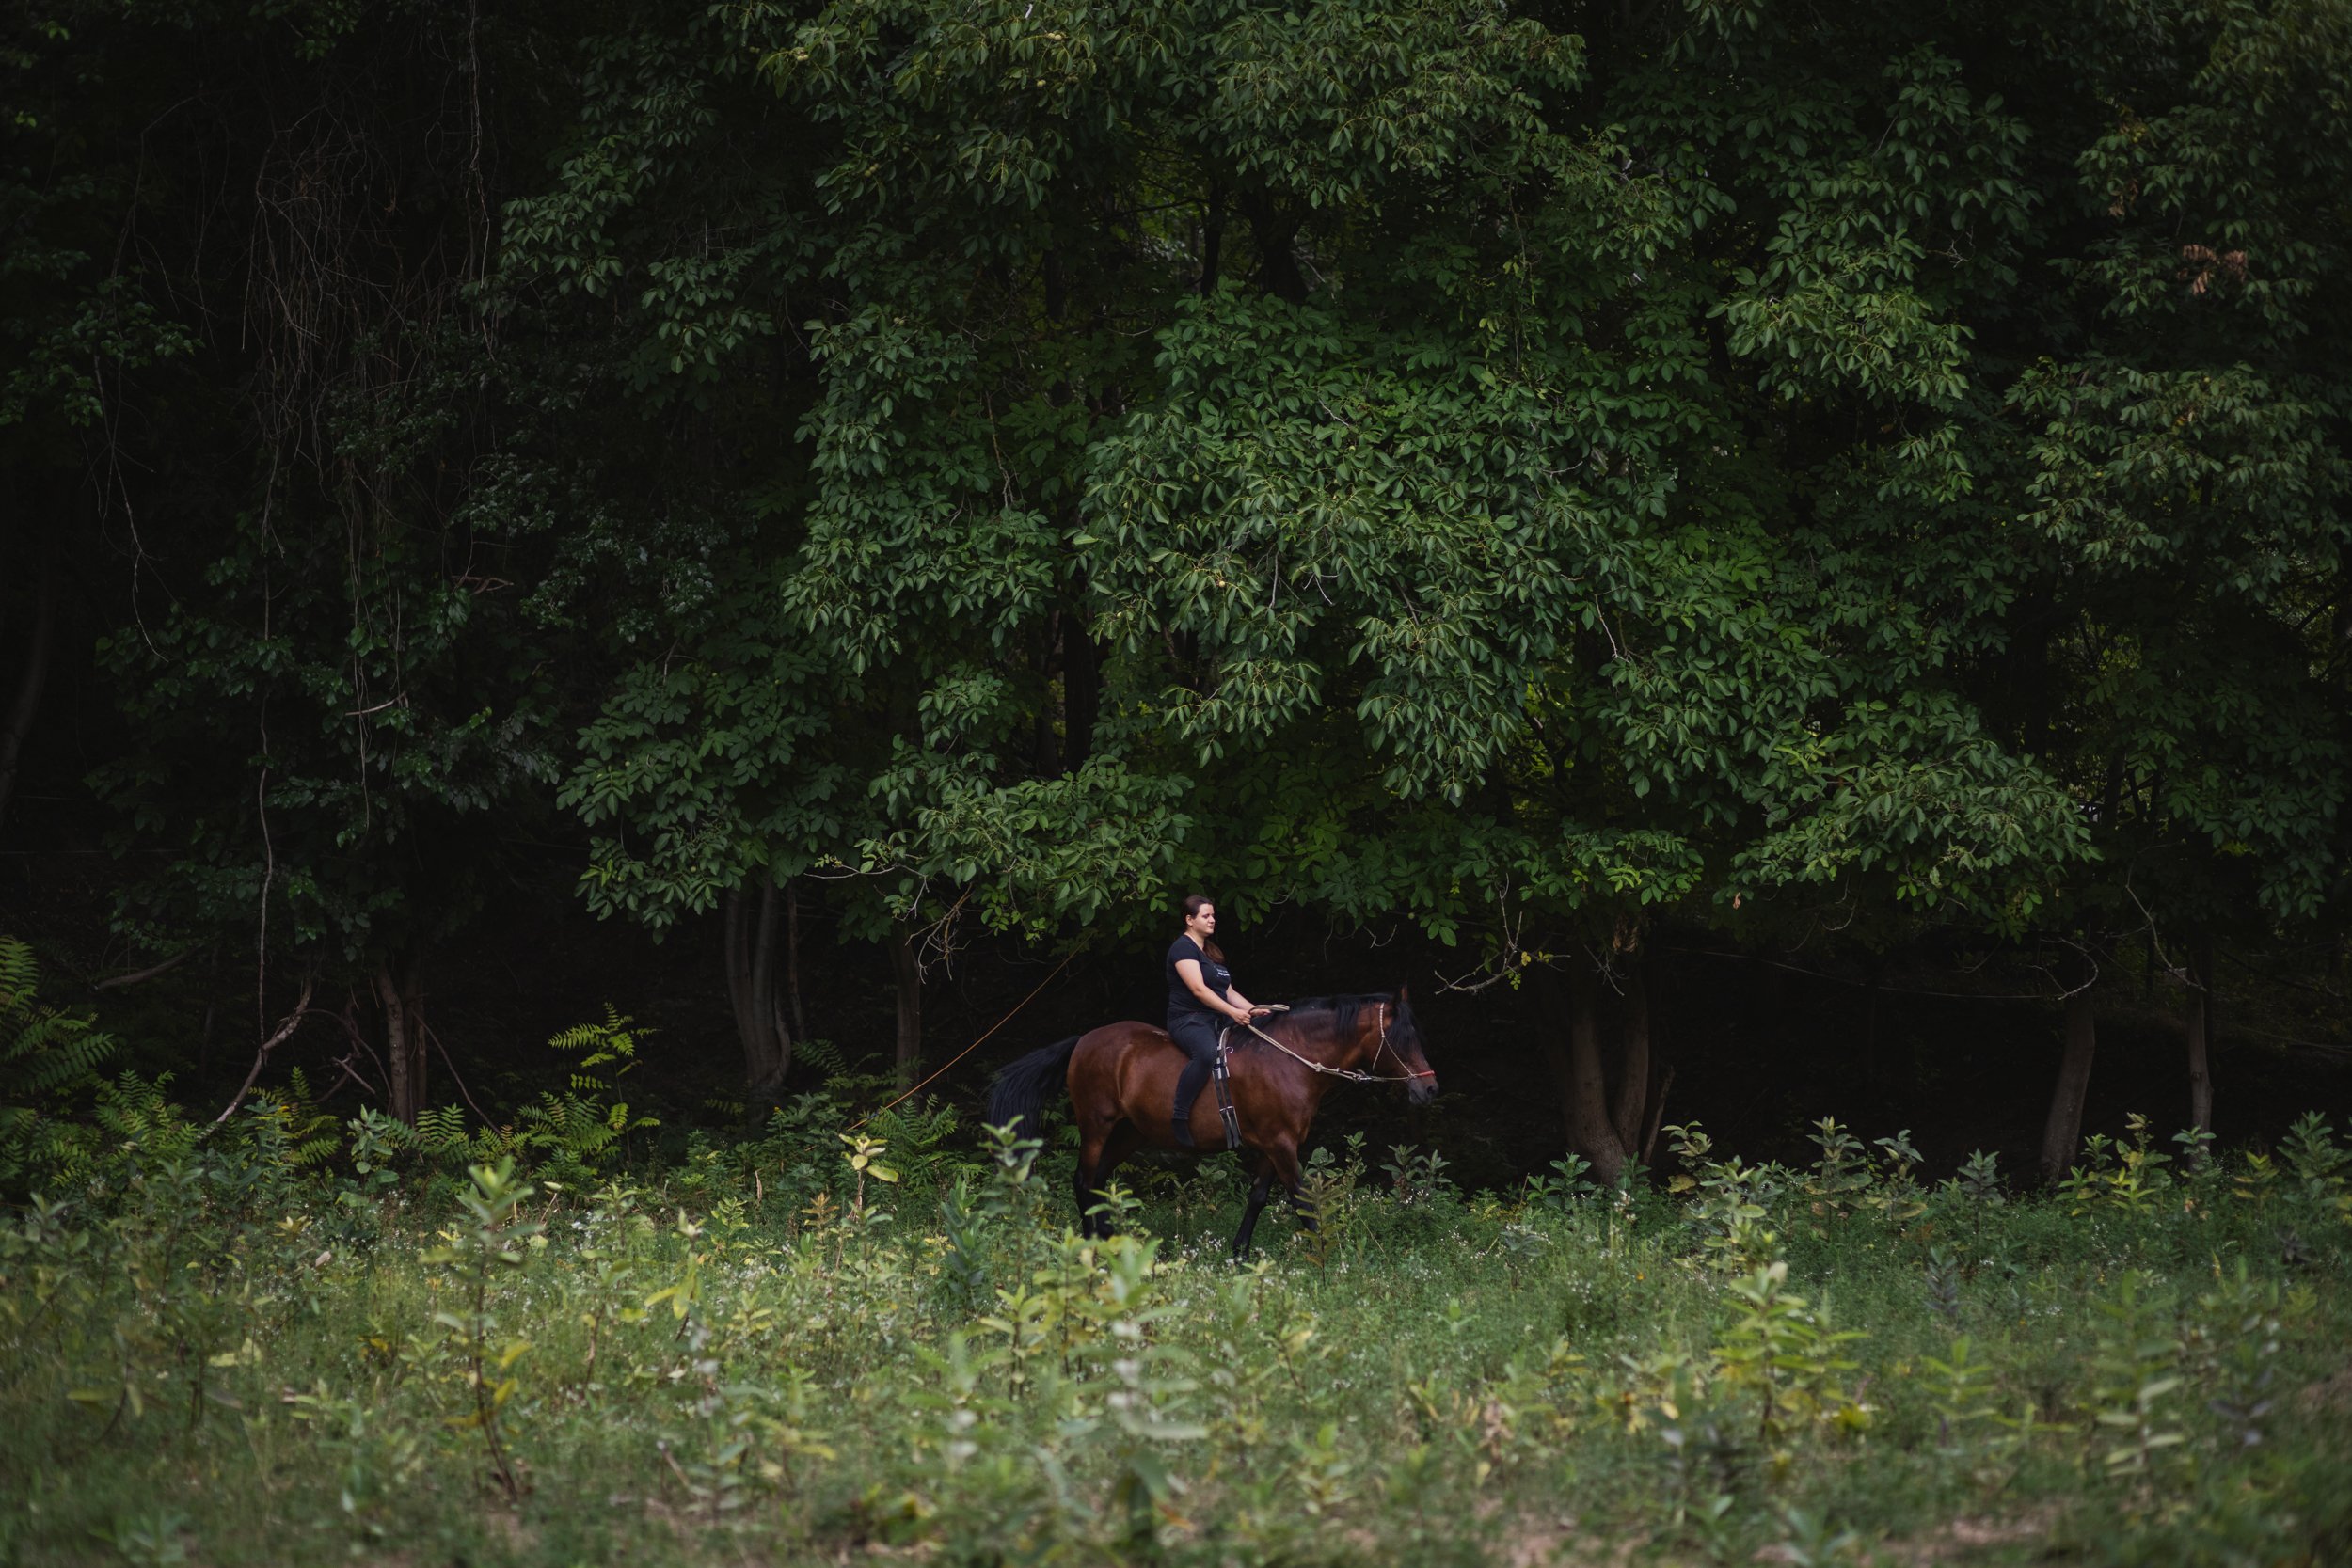  Katja on horseback in Nagyszékely on August 16, 2022. The Ukrainian volunteer arrived in the   Hungarian village from Kyiv in the spring of 2022, where she helped local farmers with plant production and animal care works until autumn. Because of her